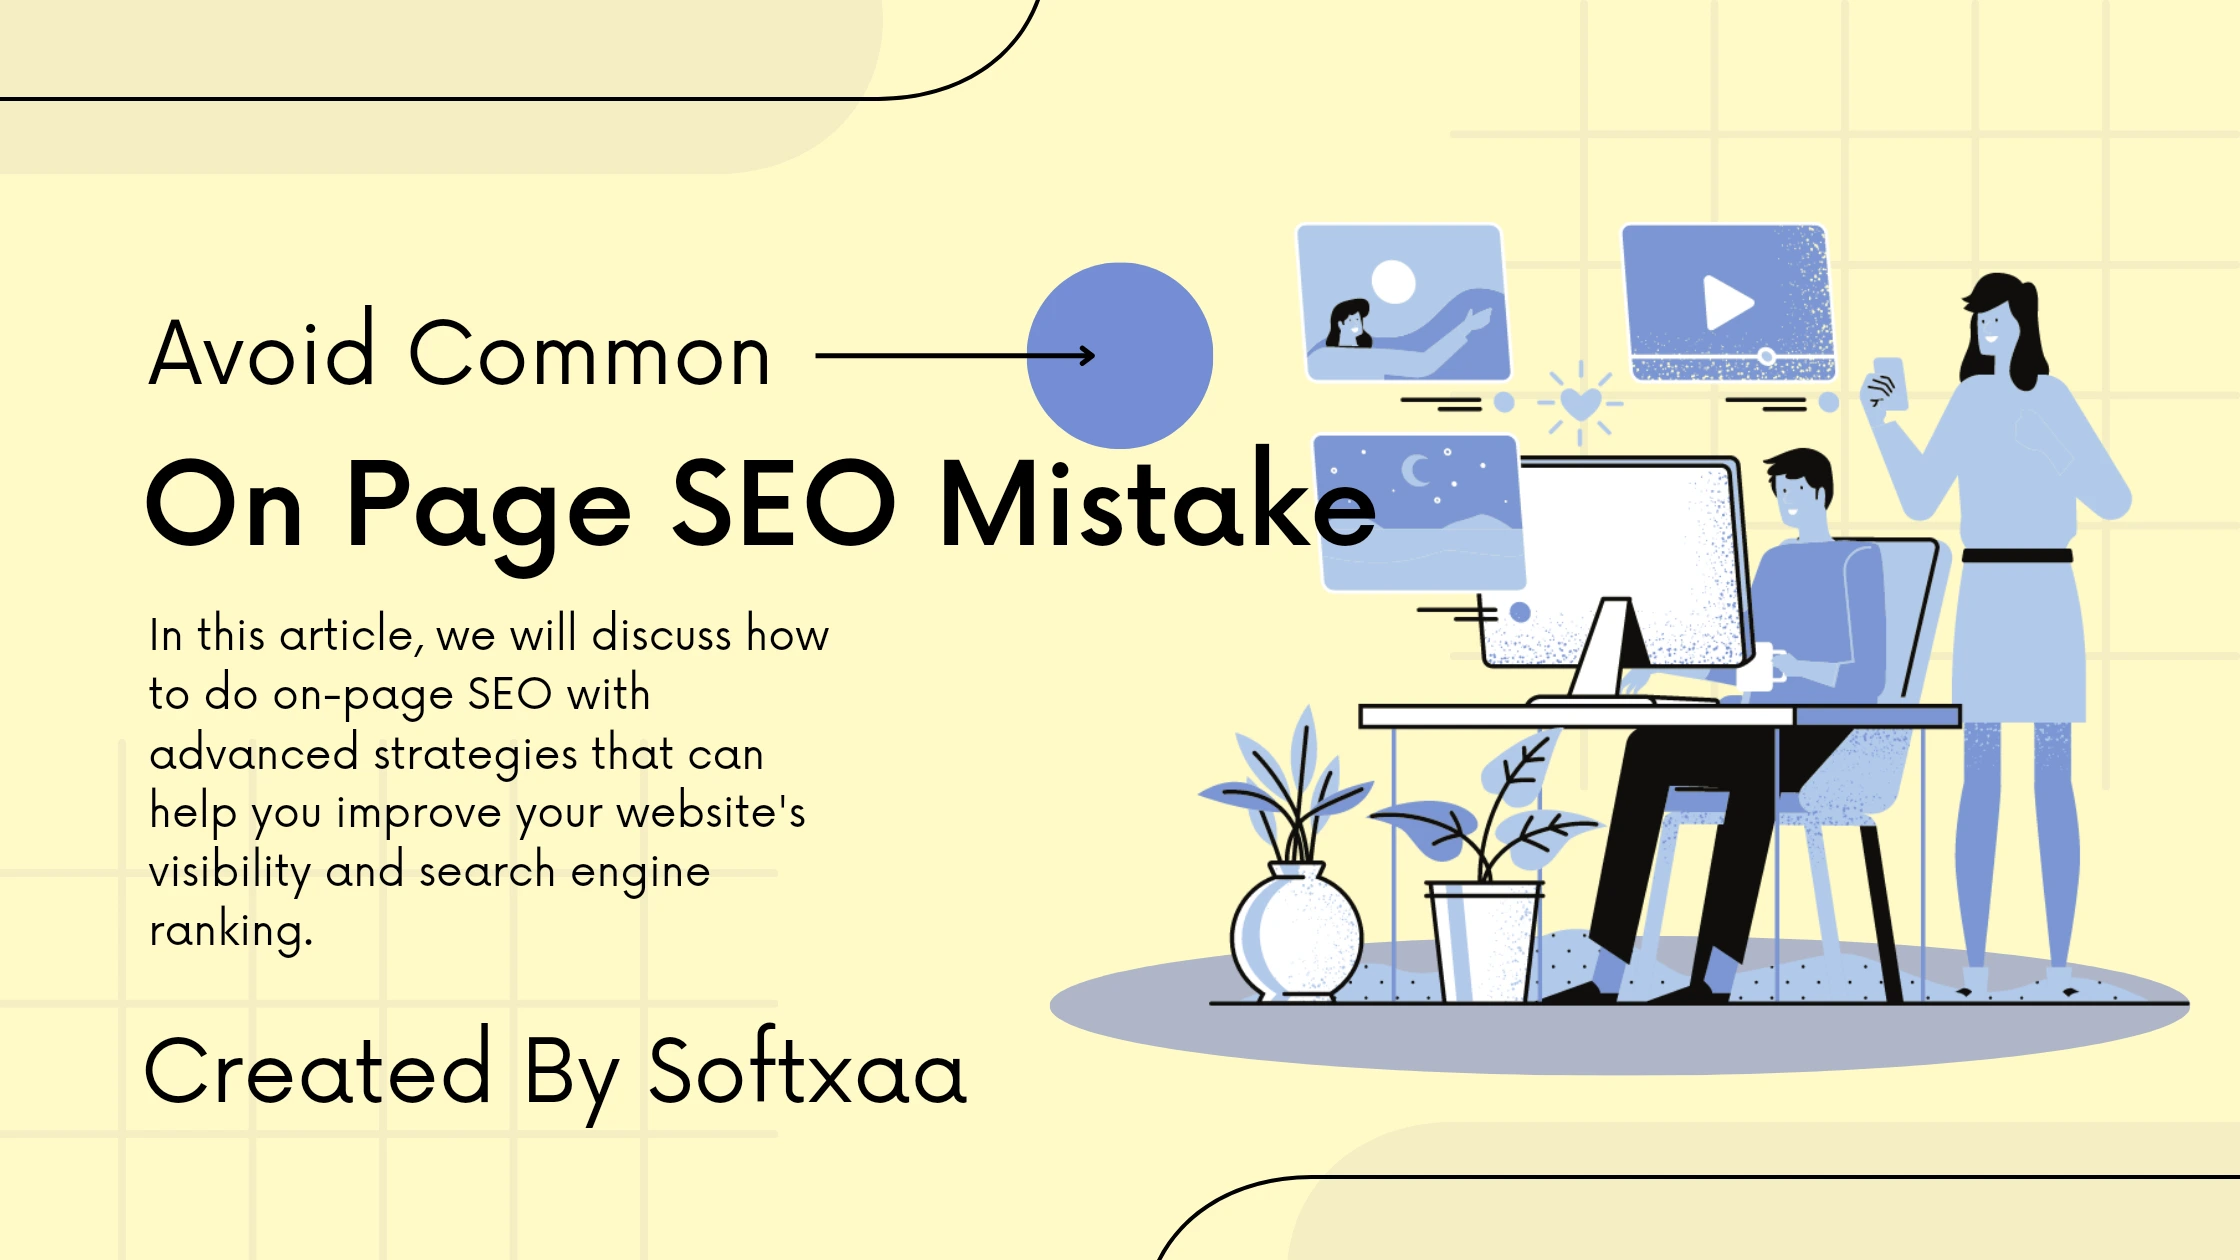 Avoid Common On-Page SEO Mistakes